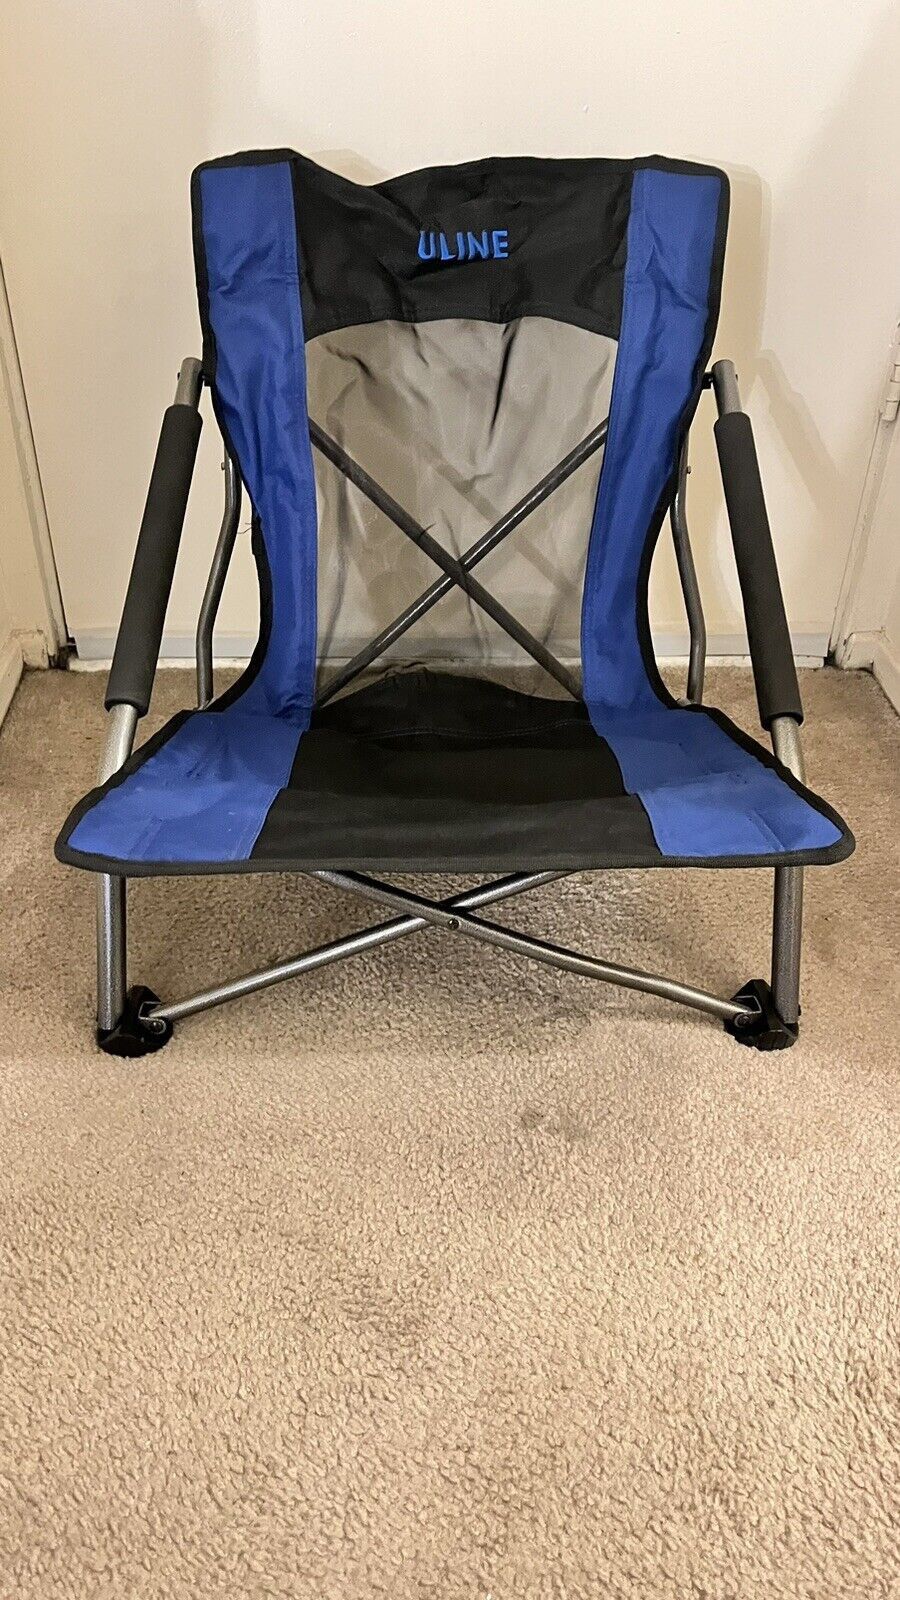 Compact folding chair, blue and black, mesh